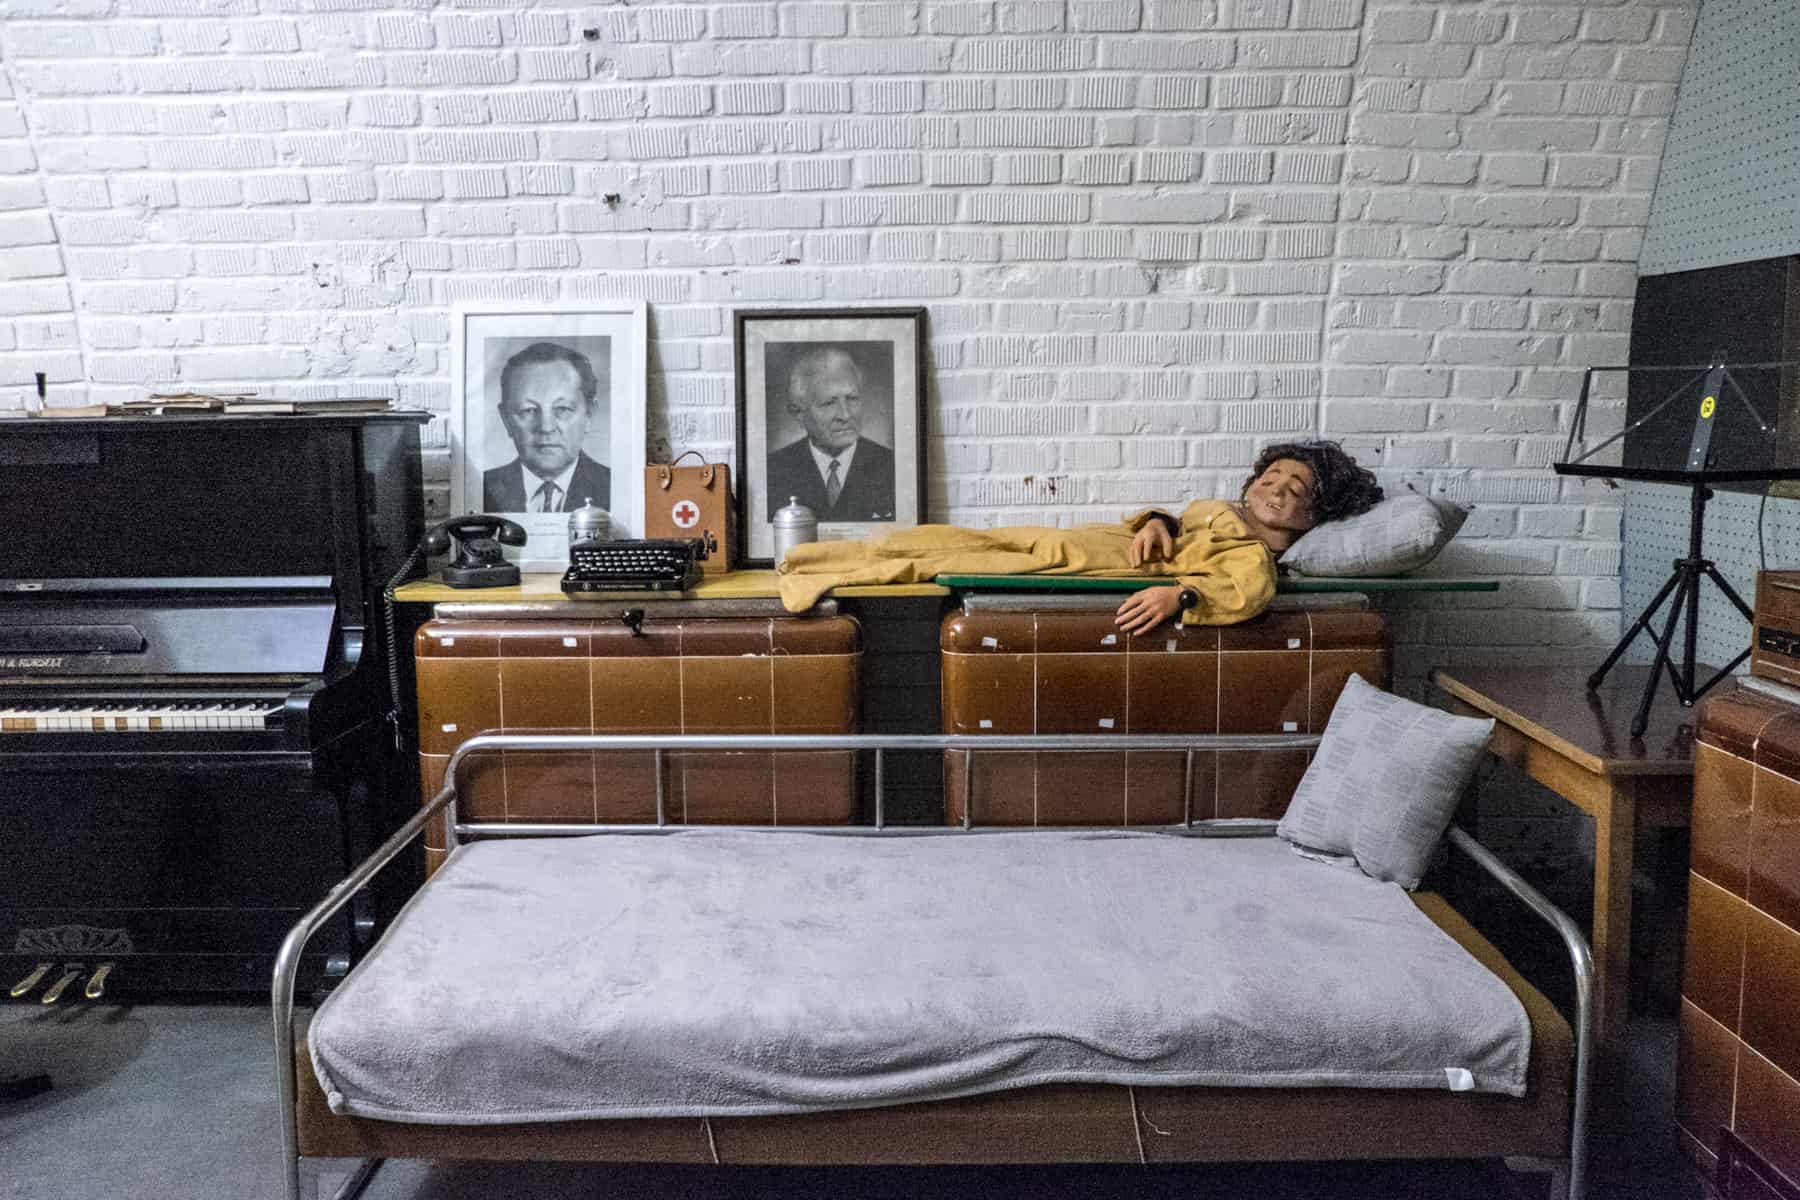 A piano, old brown furniture, black and white photos, a creepy doll in yellow dress and a metal bed with a white sheet - a selection of artefacts in the 10-Z bunker in Brno, Czech Republic. 